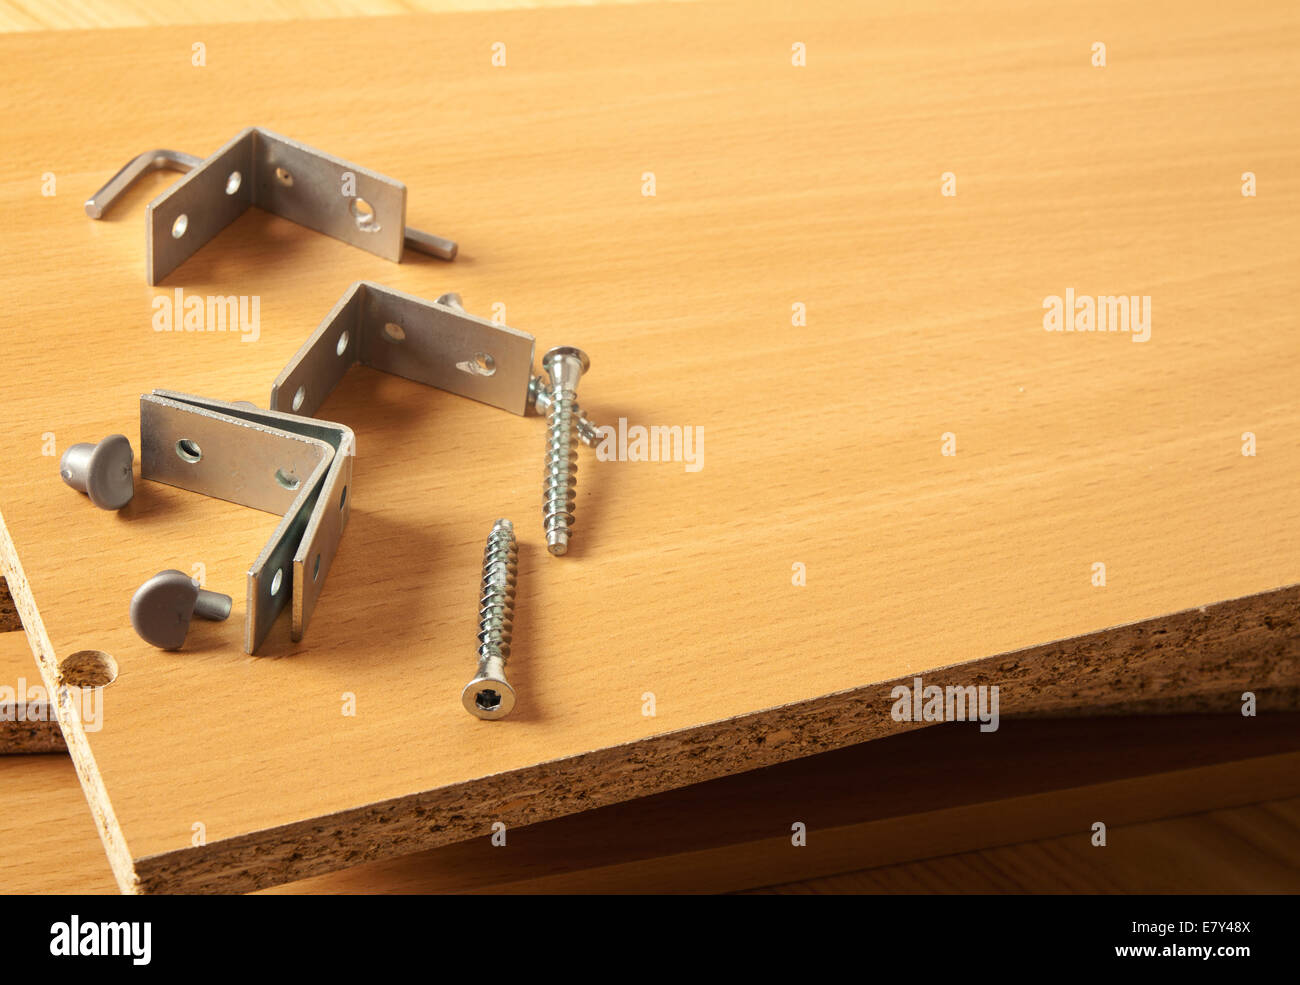 Brown wooden furniture parts for assembly Stock Photo